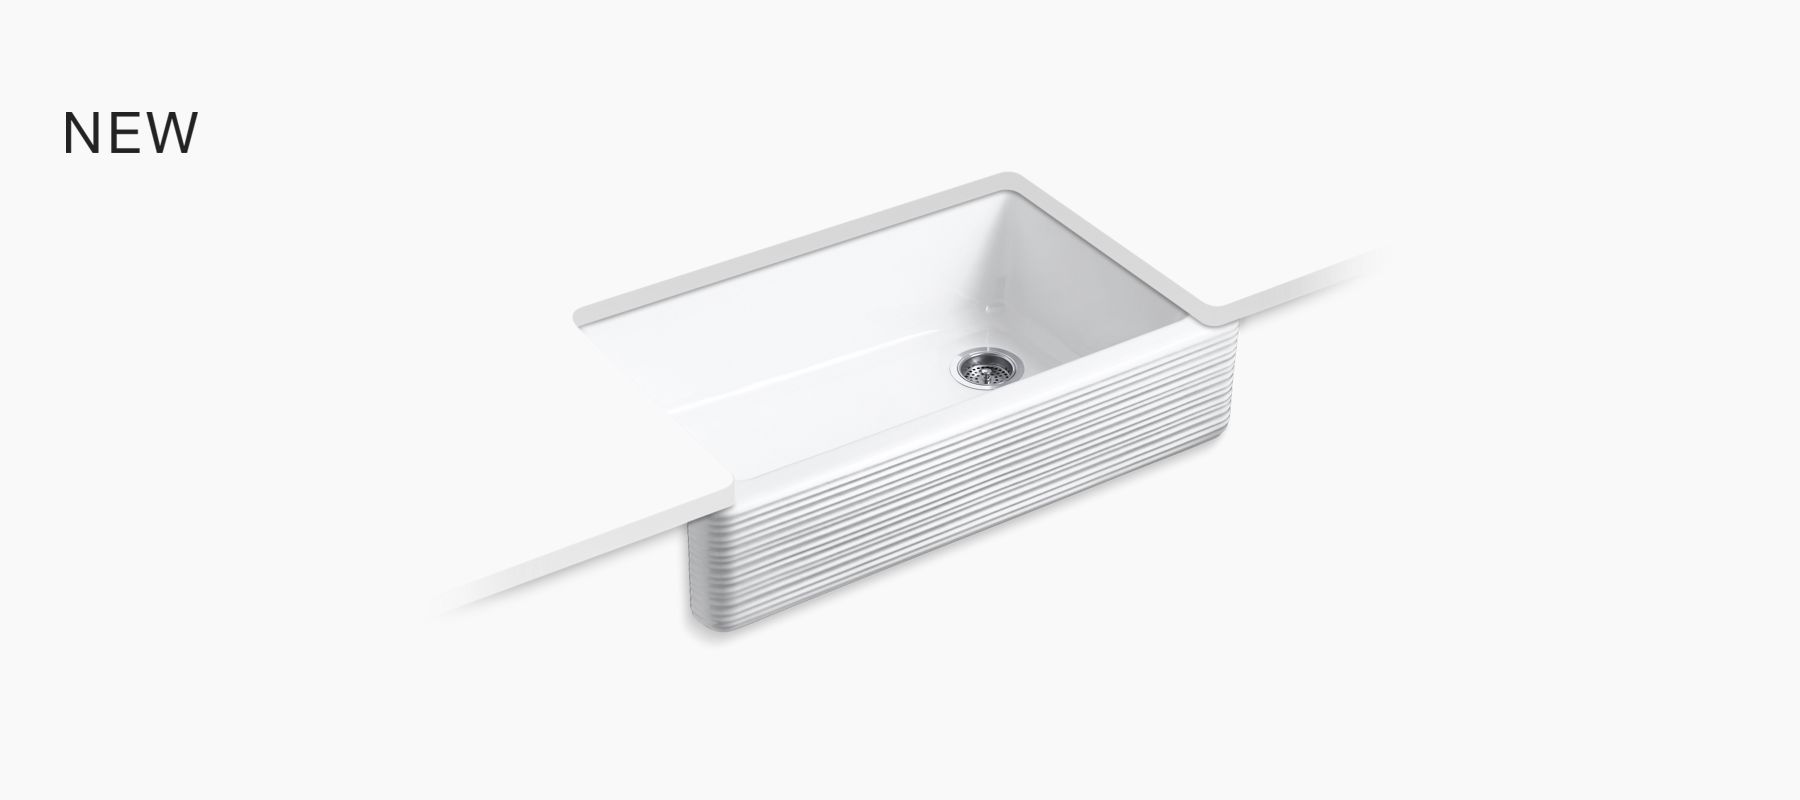 Trieste Top Mount Kitchen Sink With Four Faucet Holes K 5914 4